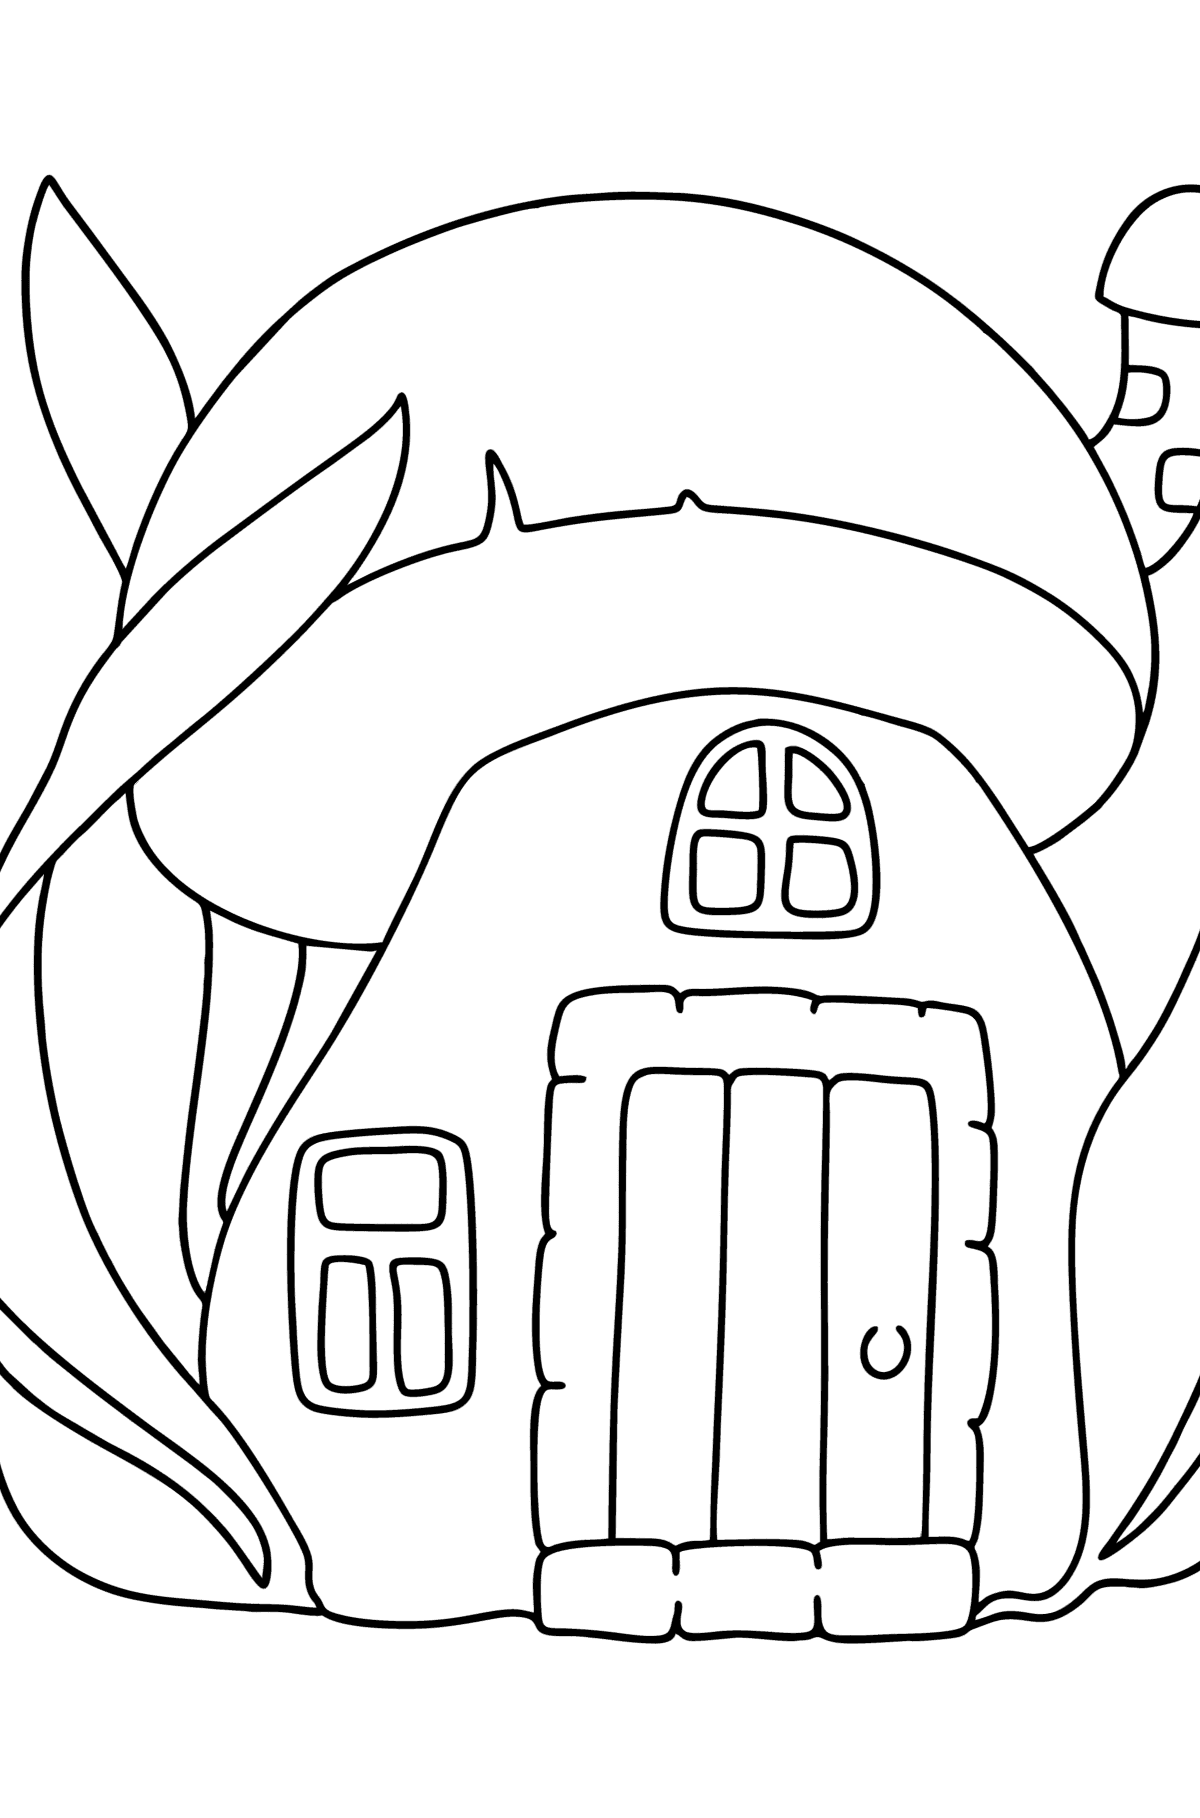 House mushroom coloring page - Coloring Pages for Kids